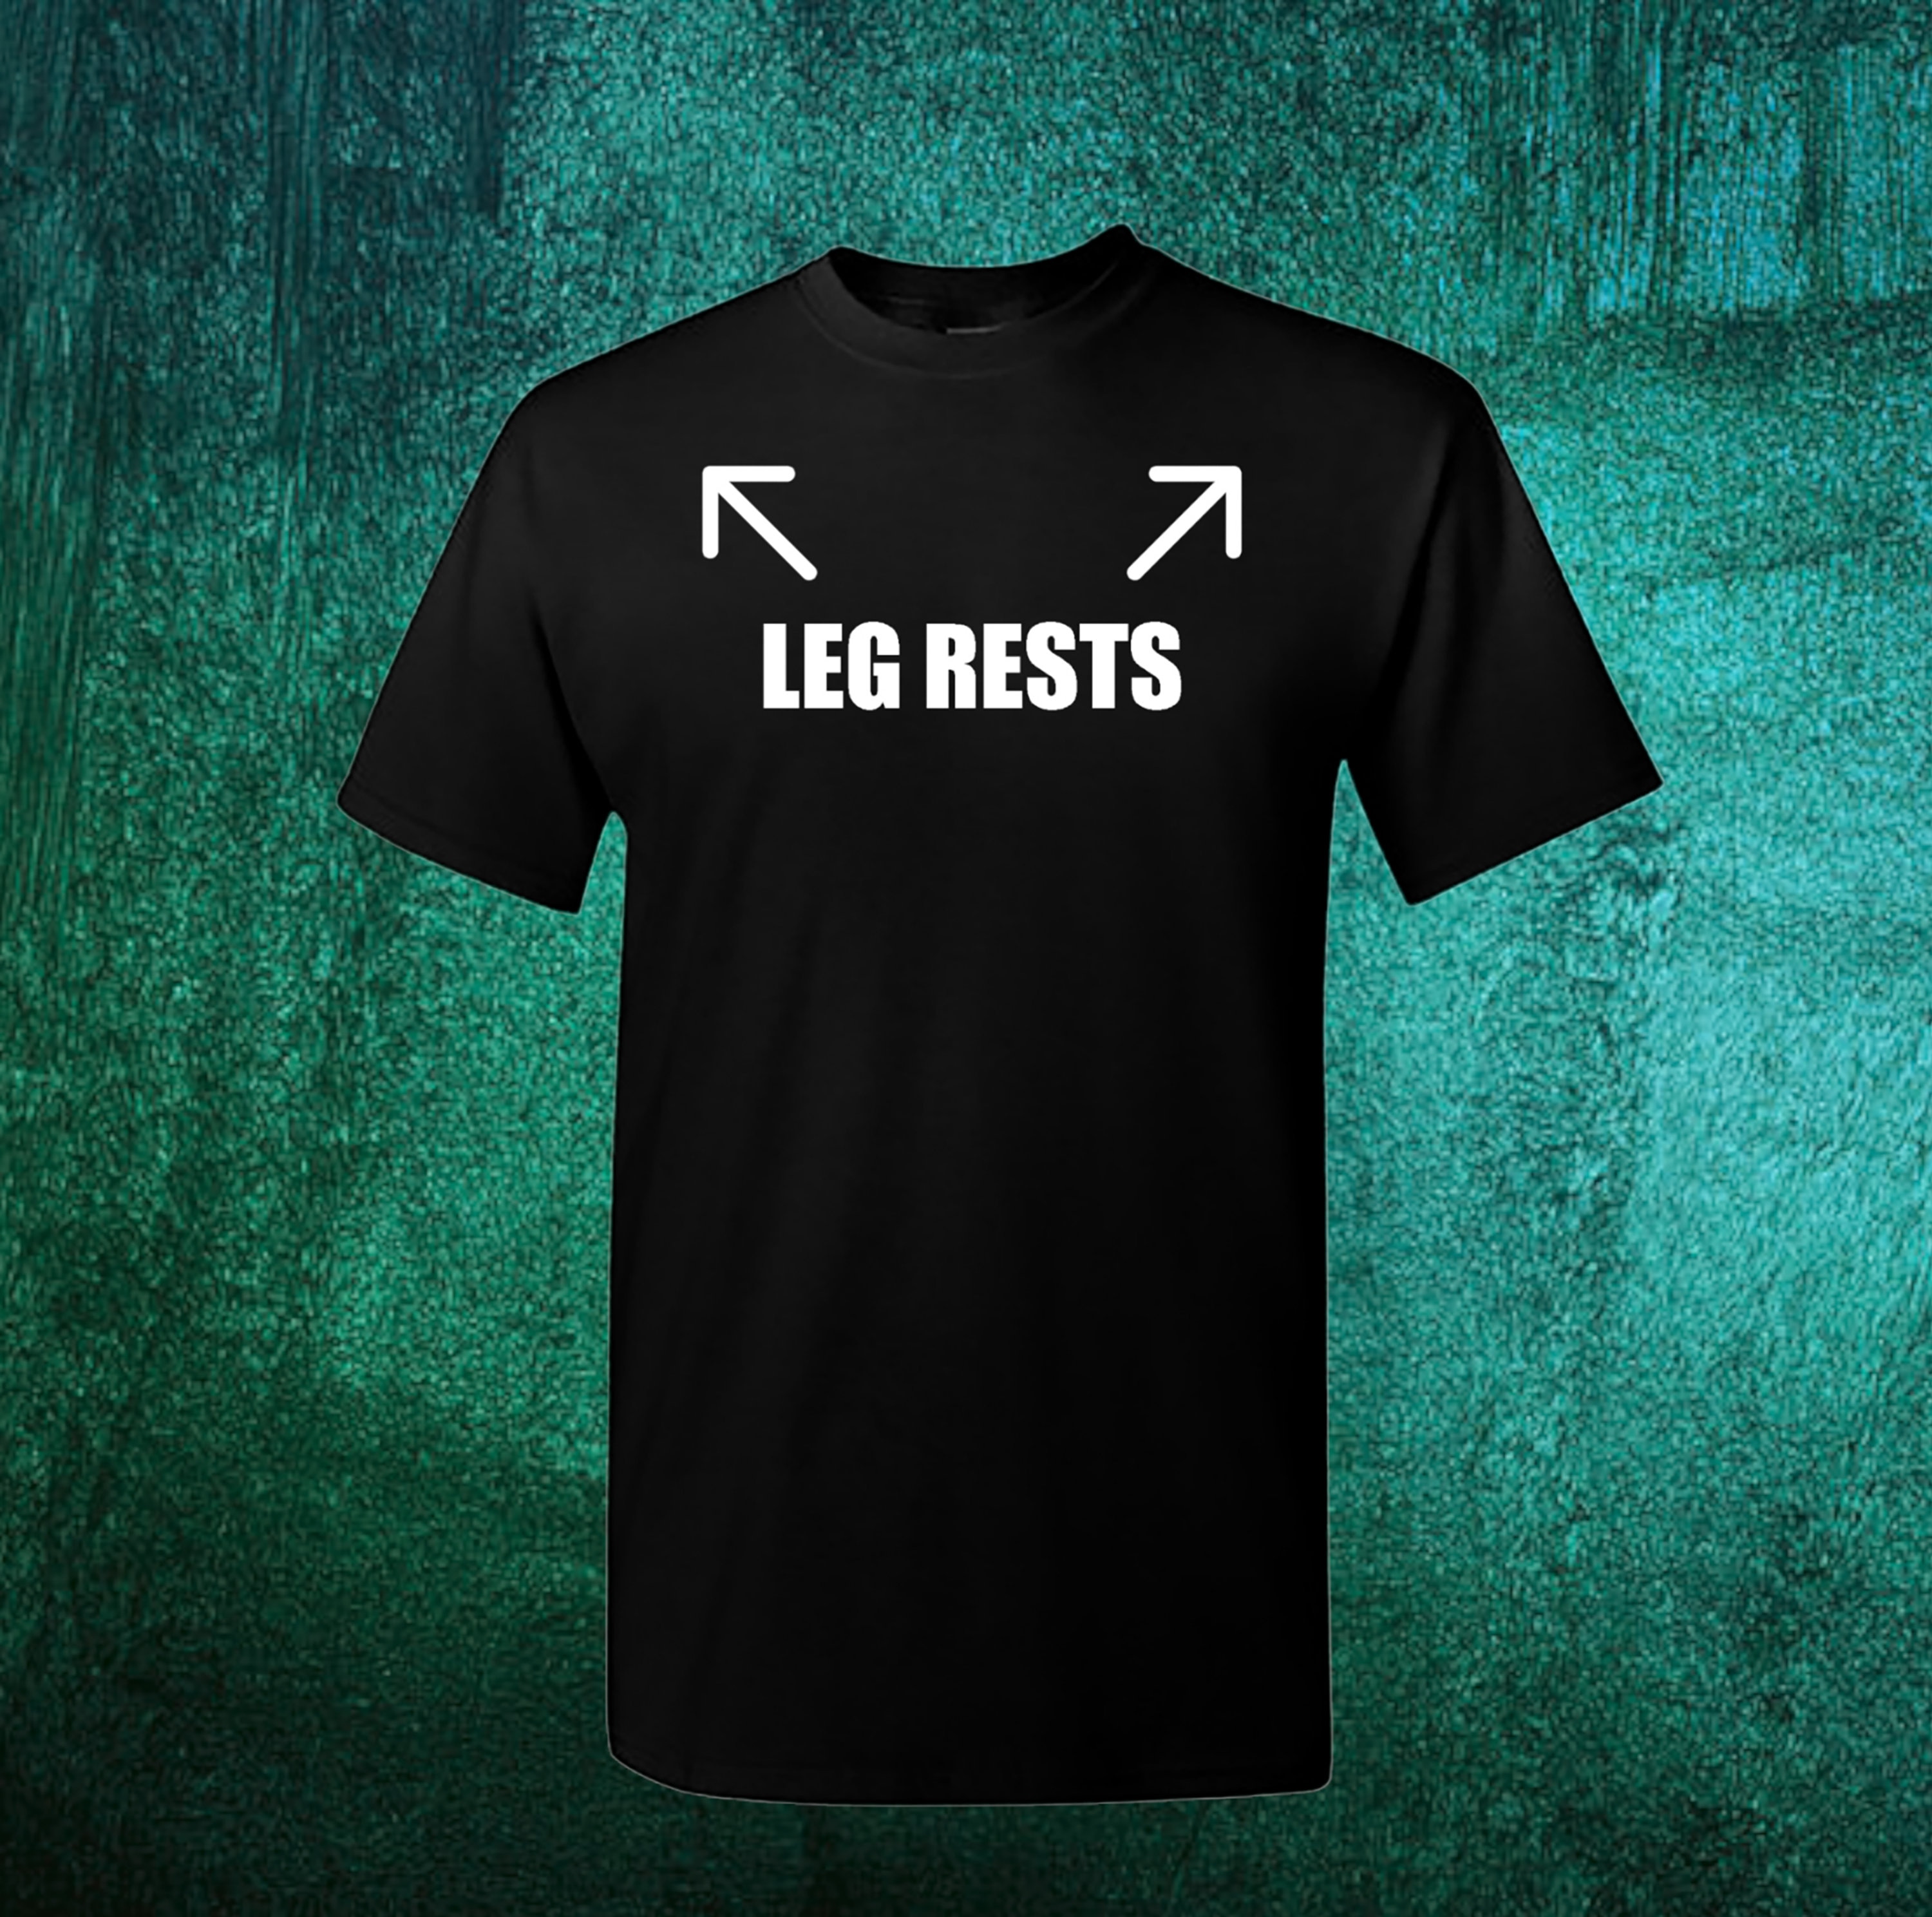 Leg Rests with Arrows - Dirty Rude Sexual Funny Sayings Mens T-shirt